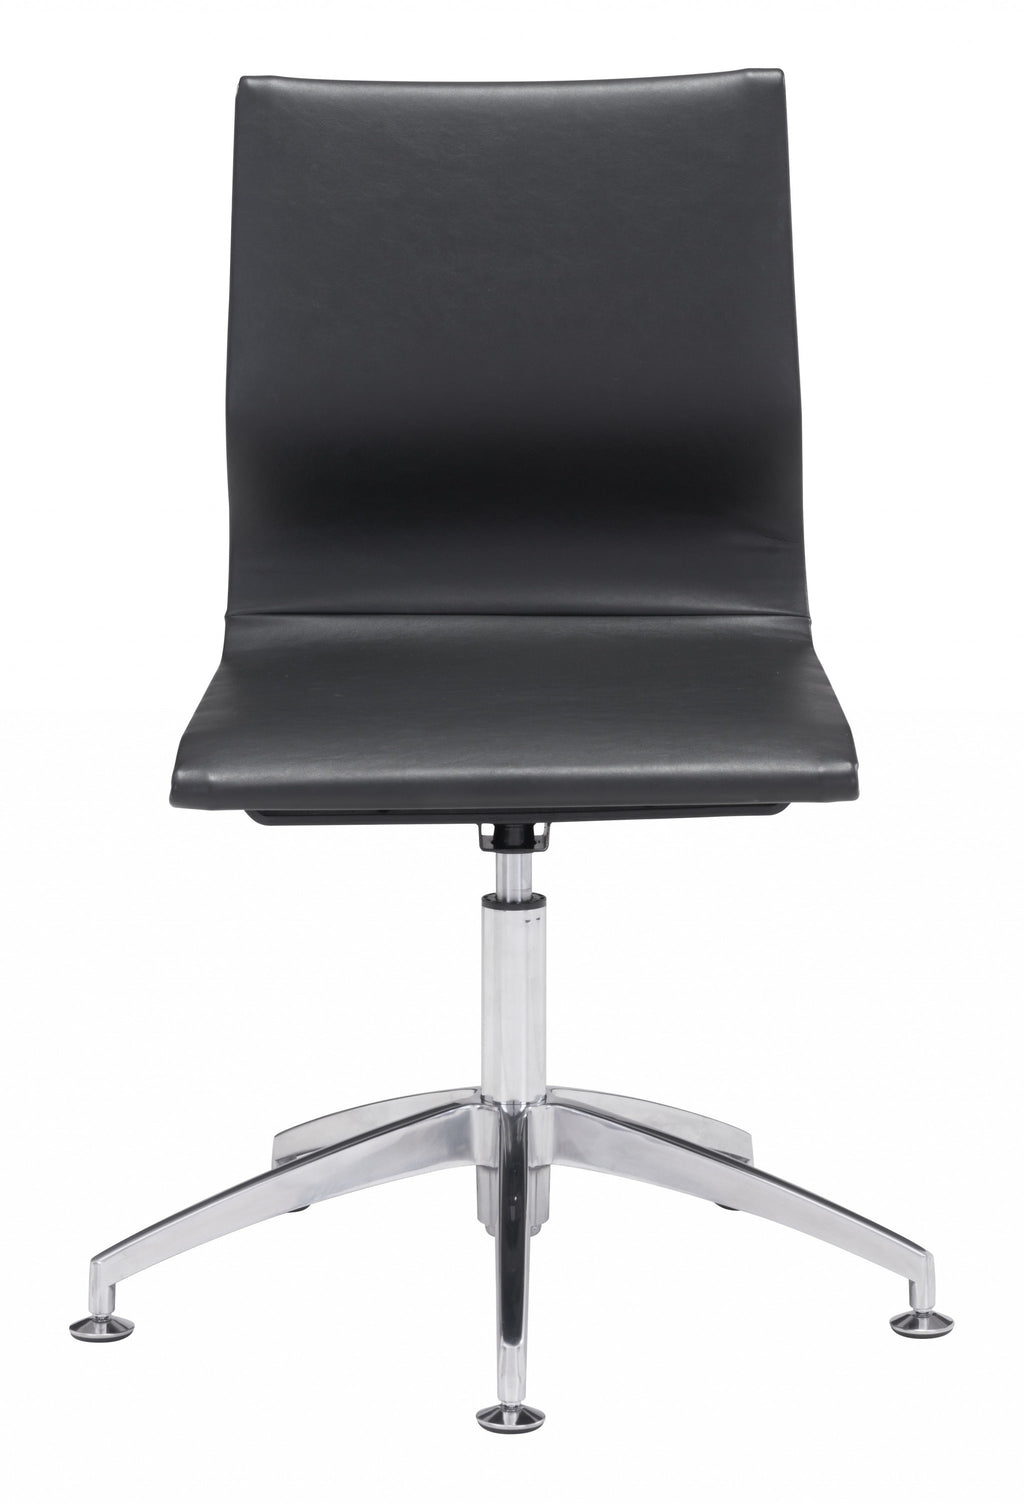 Black Faux Leather Seat Swivel Adjustable Conference Chair Metal Back Steel Frame - 99fab 